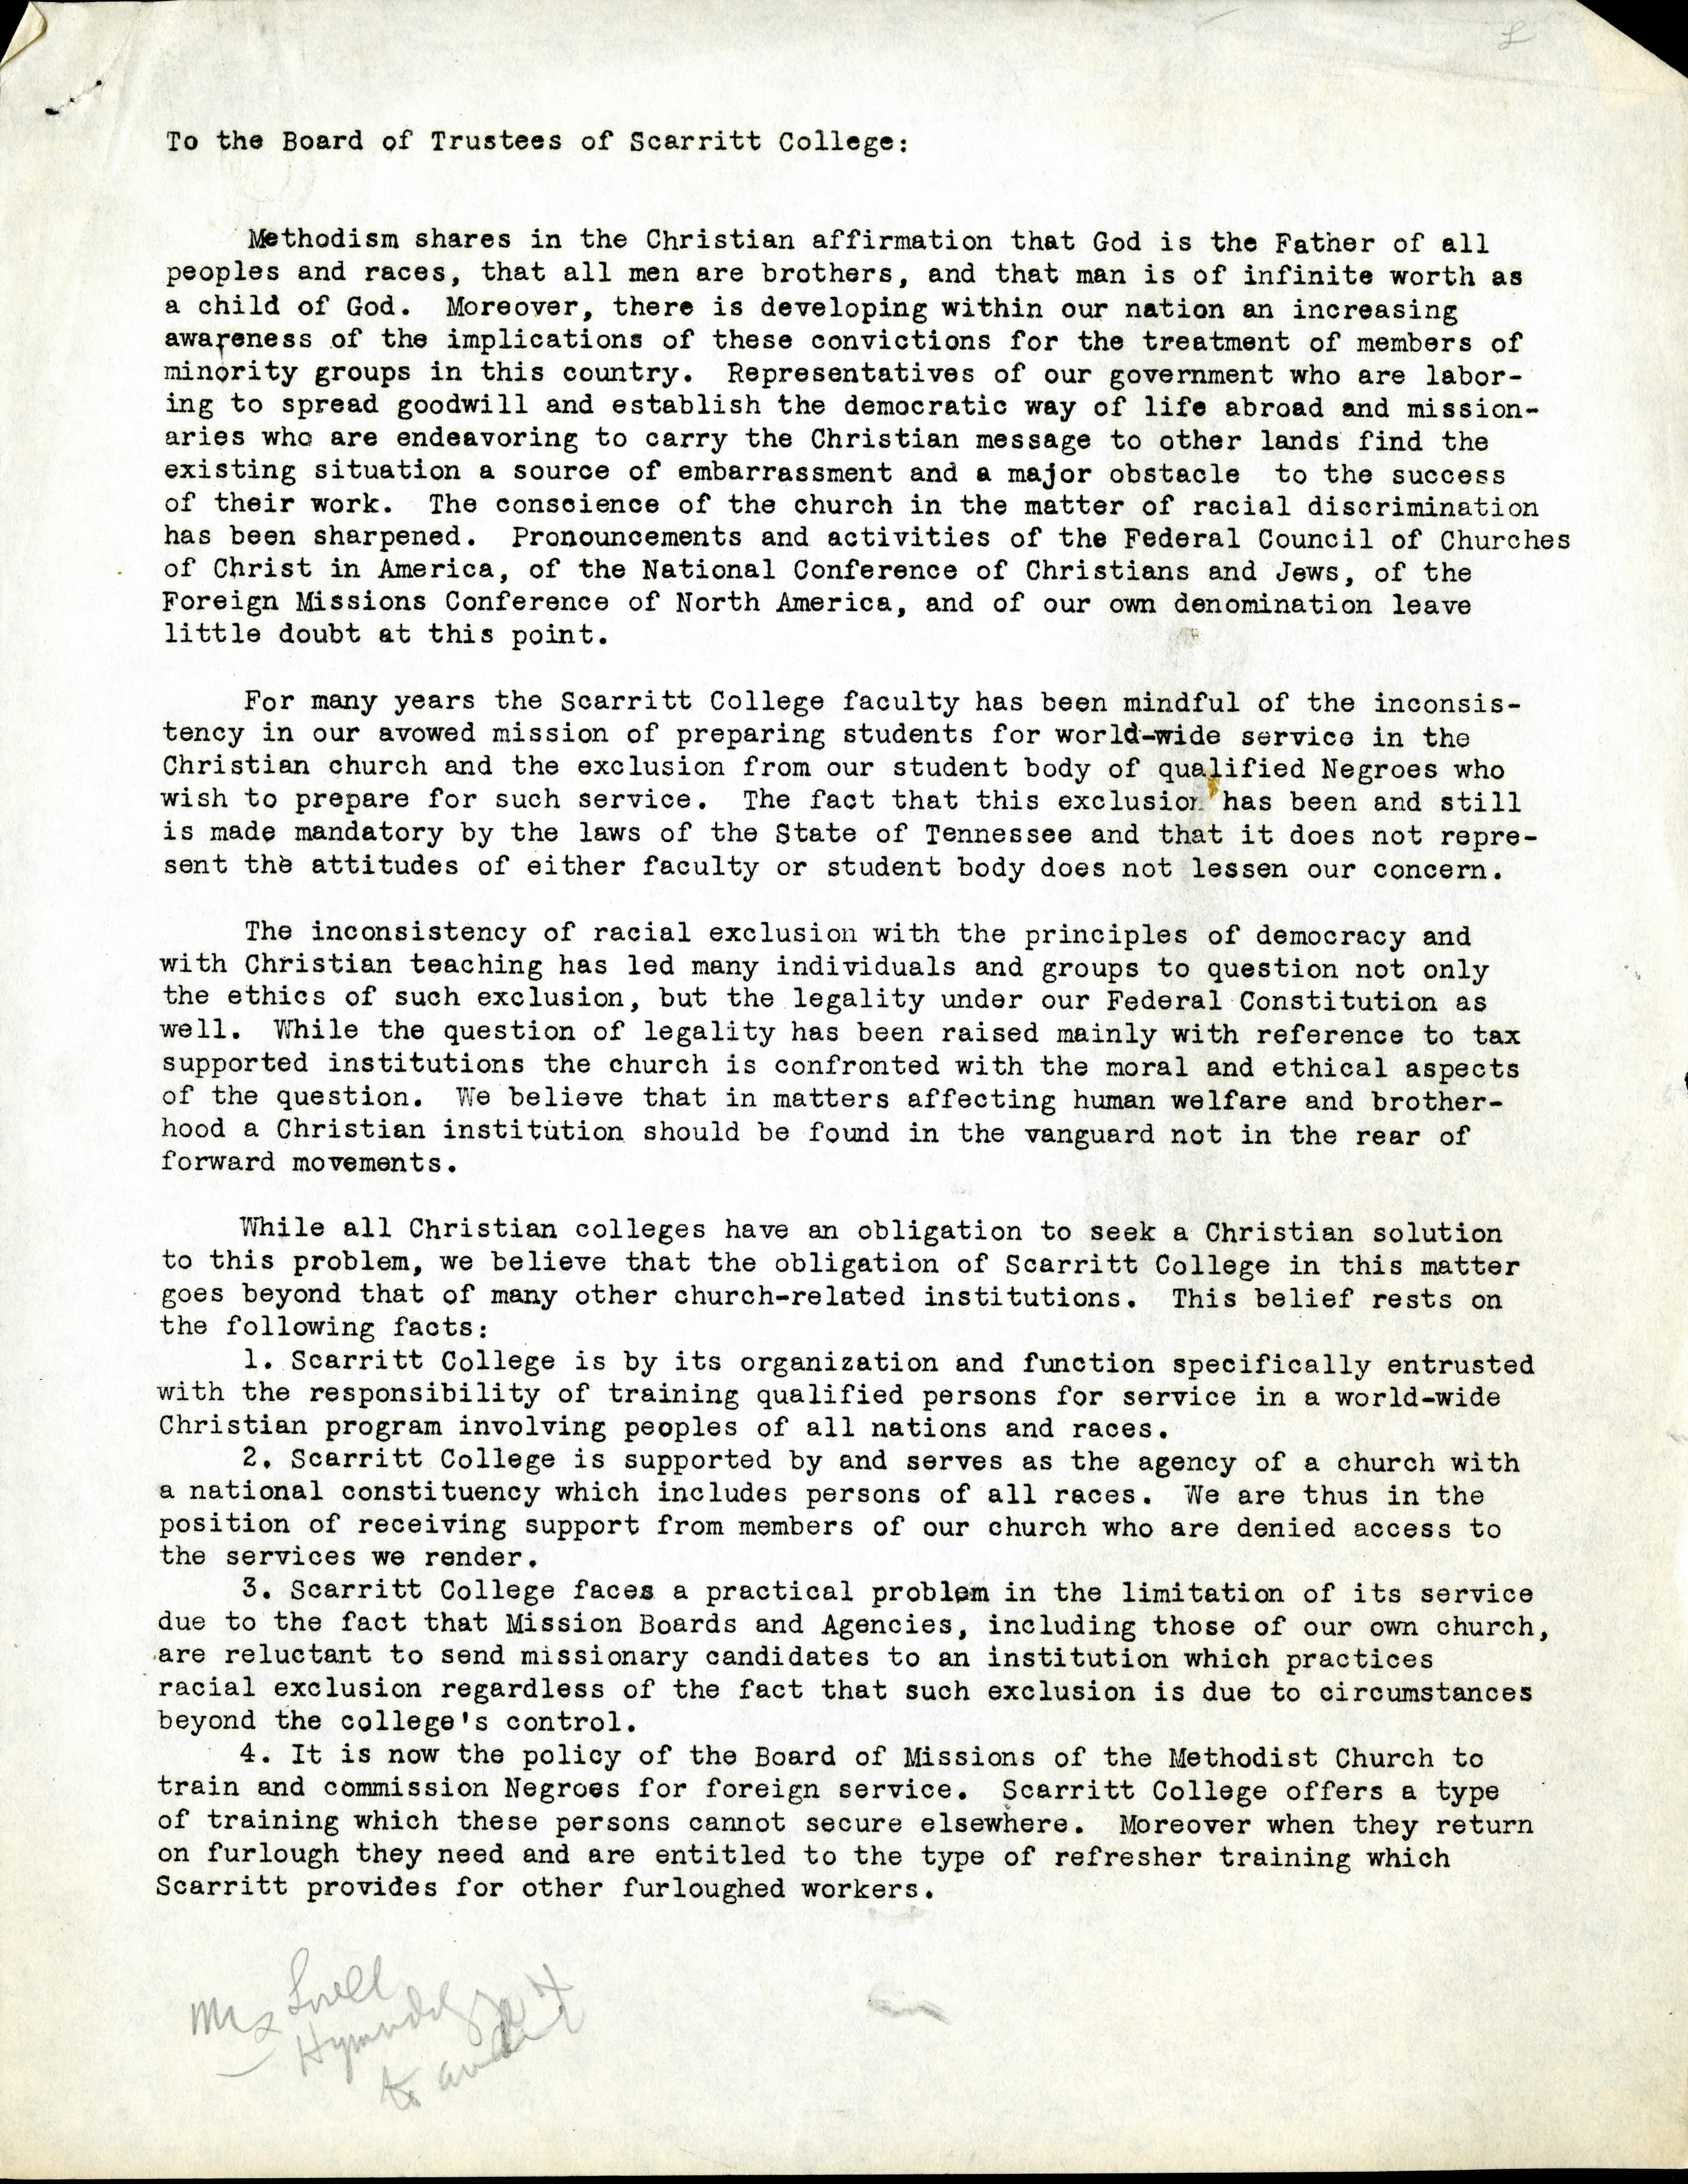 Copy of the letter sent to the board of trustee